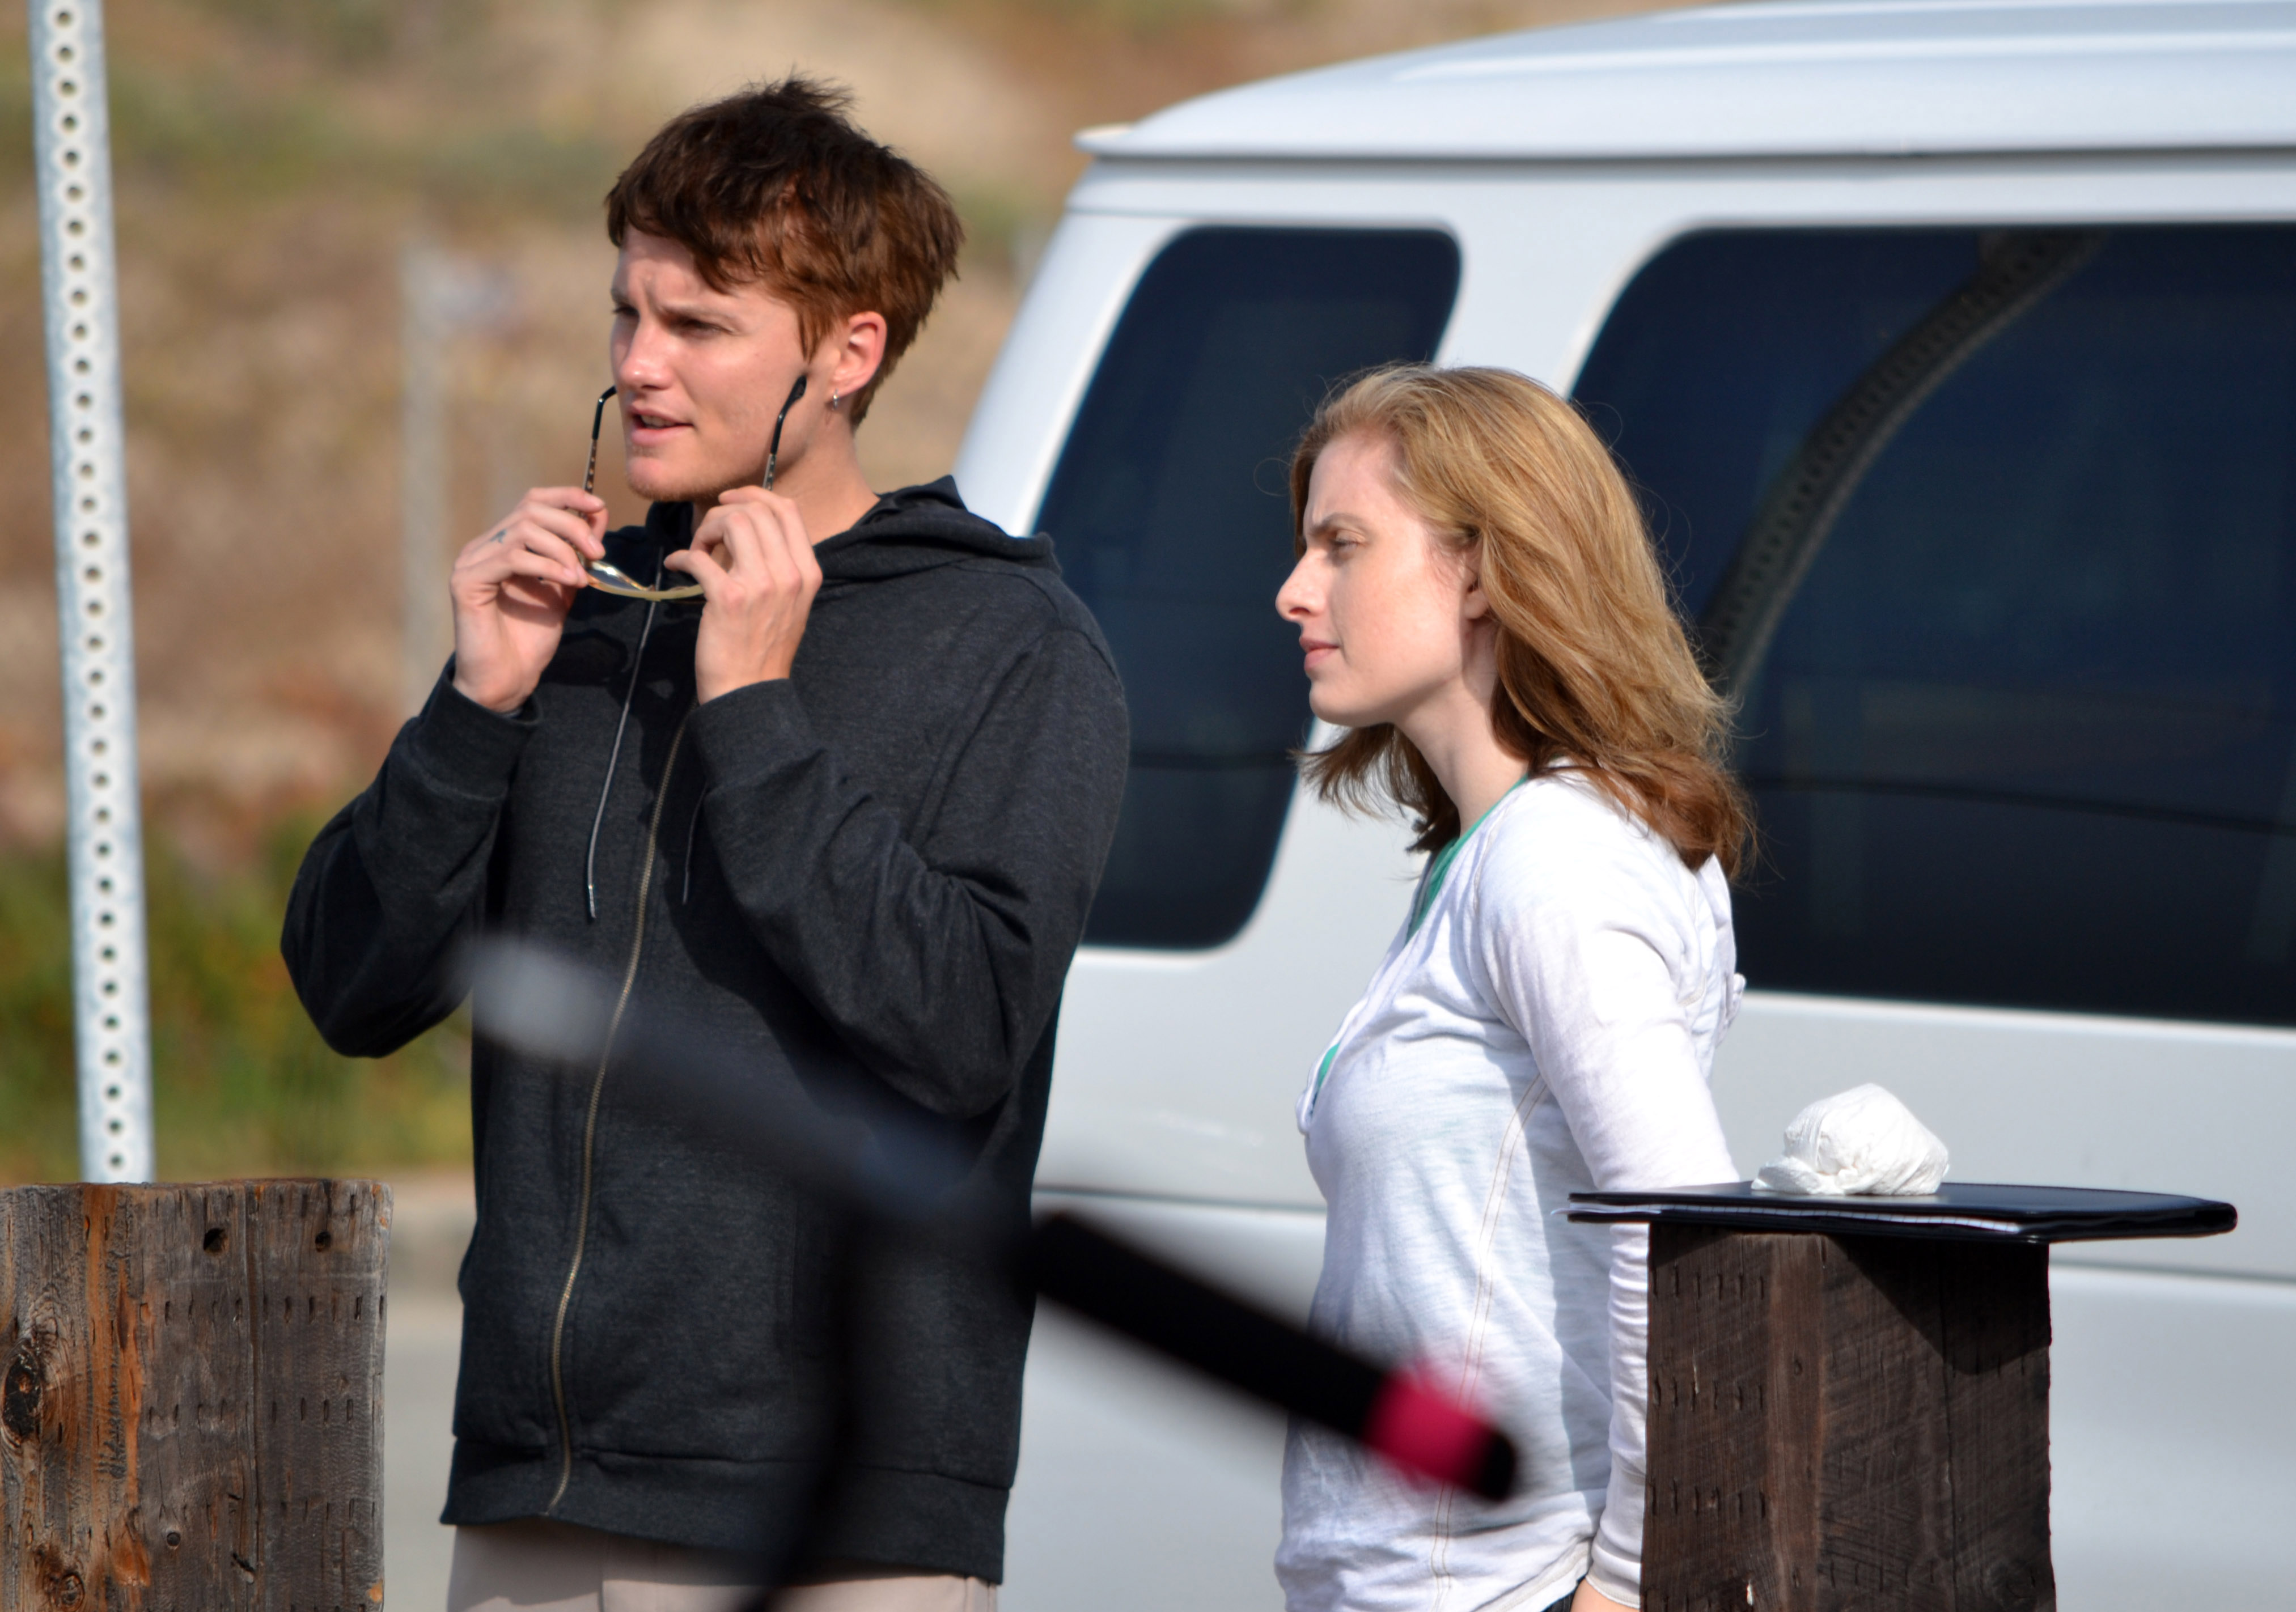 Jennifer Clary on the set of The Silent Thief with Toby Hemingway.